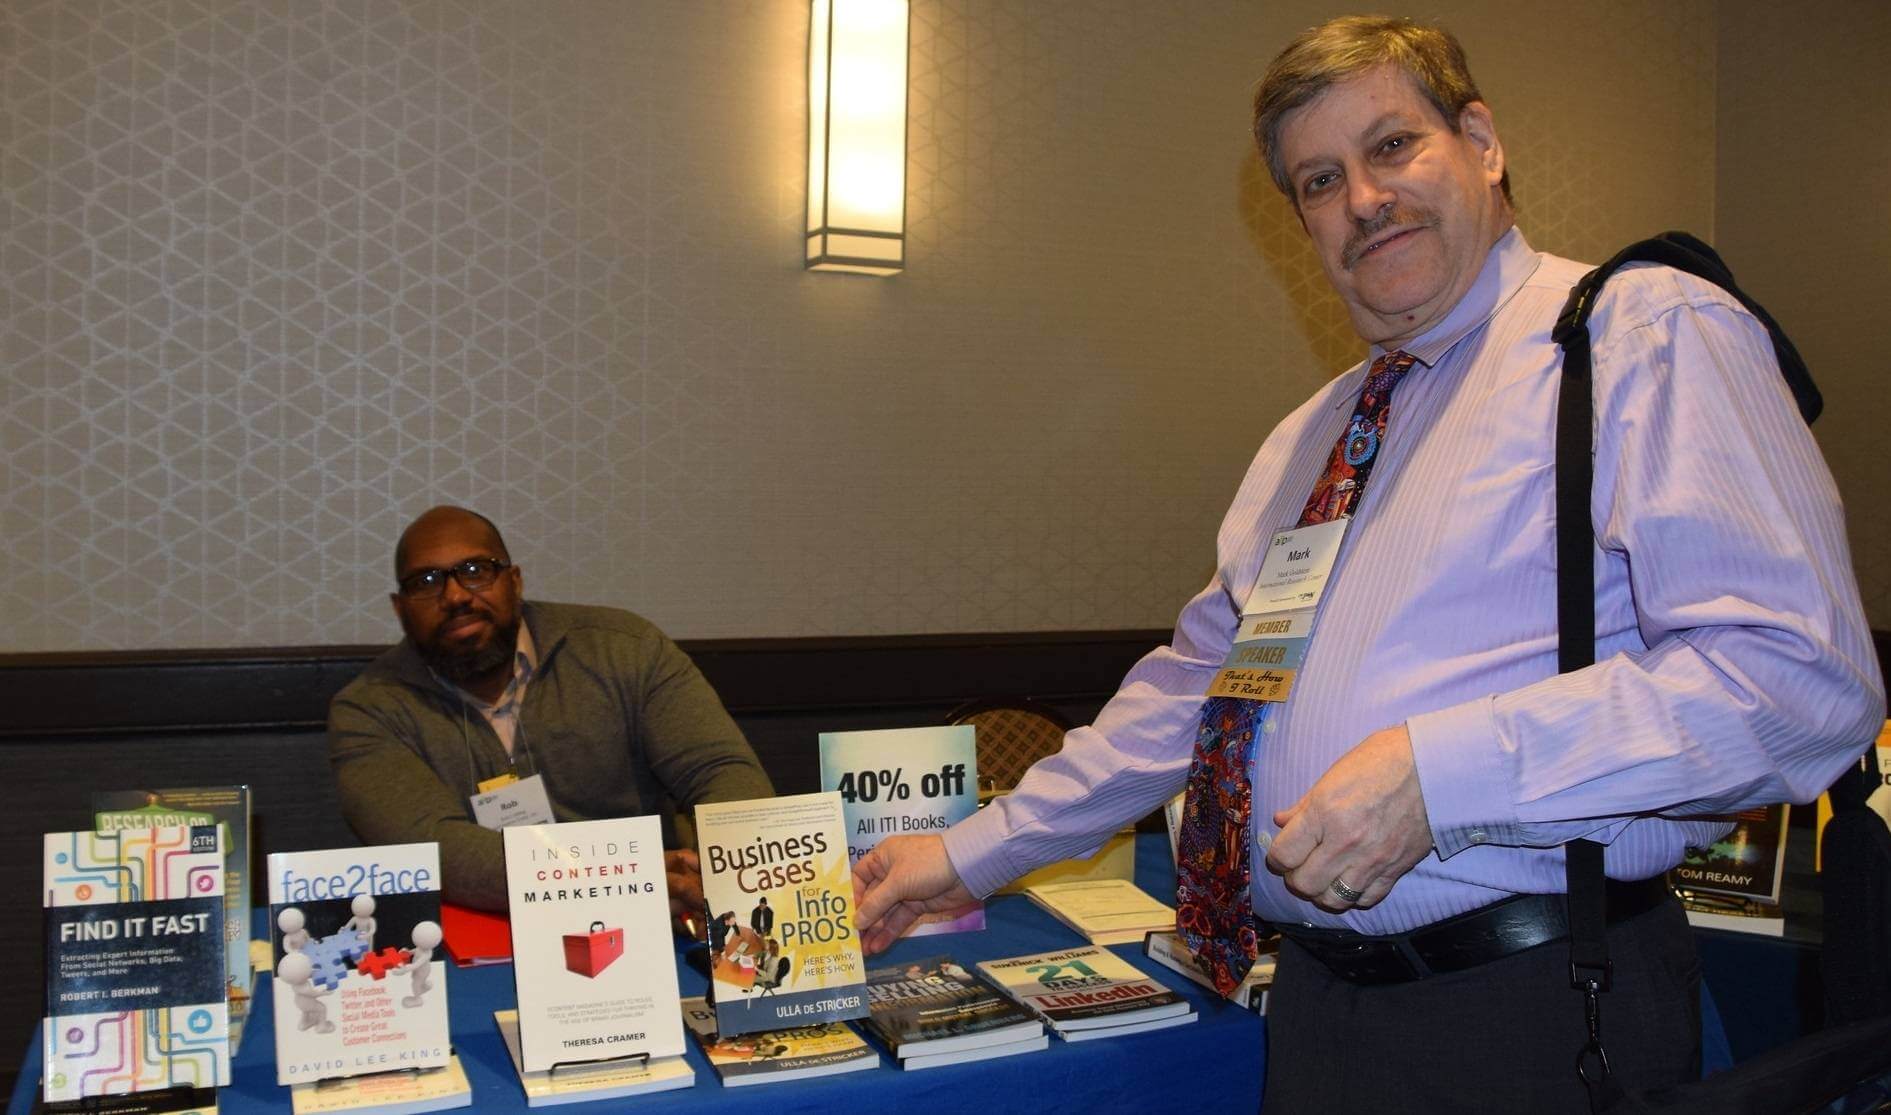 An AIIP Gold Partner, Information Today offered its books and subscriptions at an attractive discount at a recent AIIP conference.